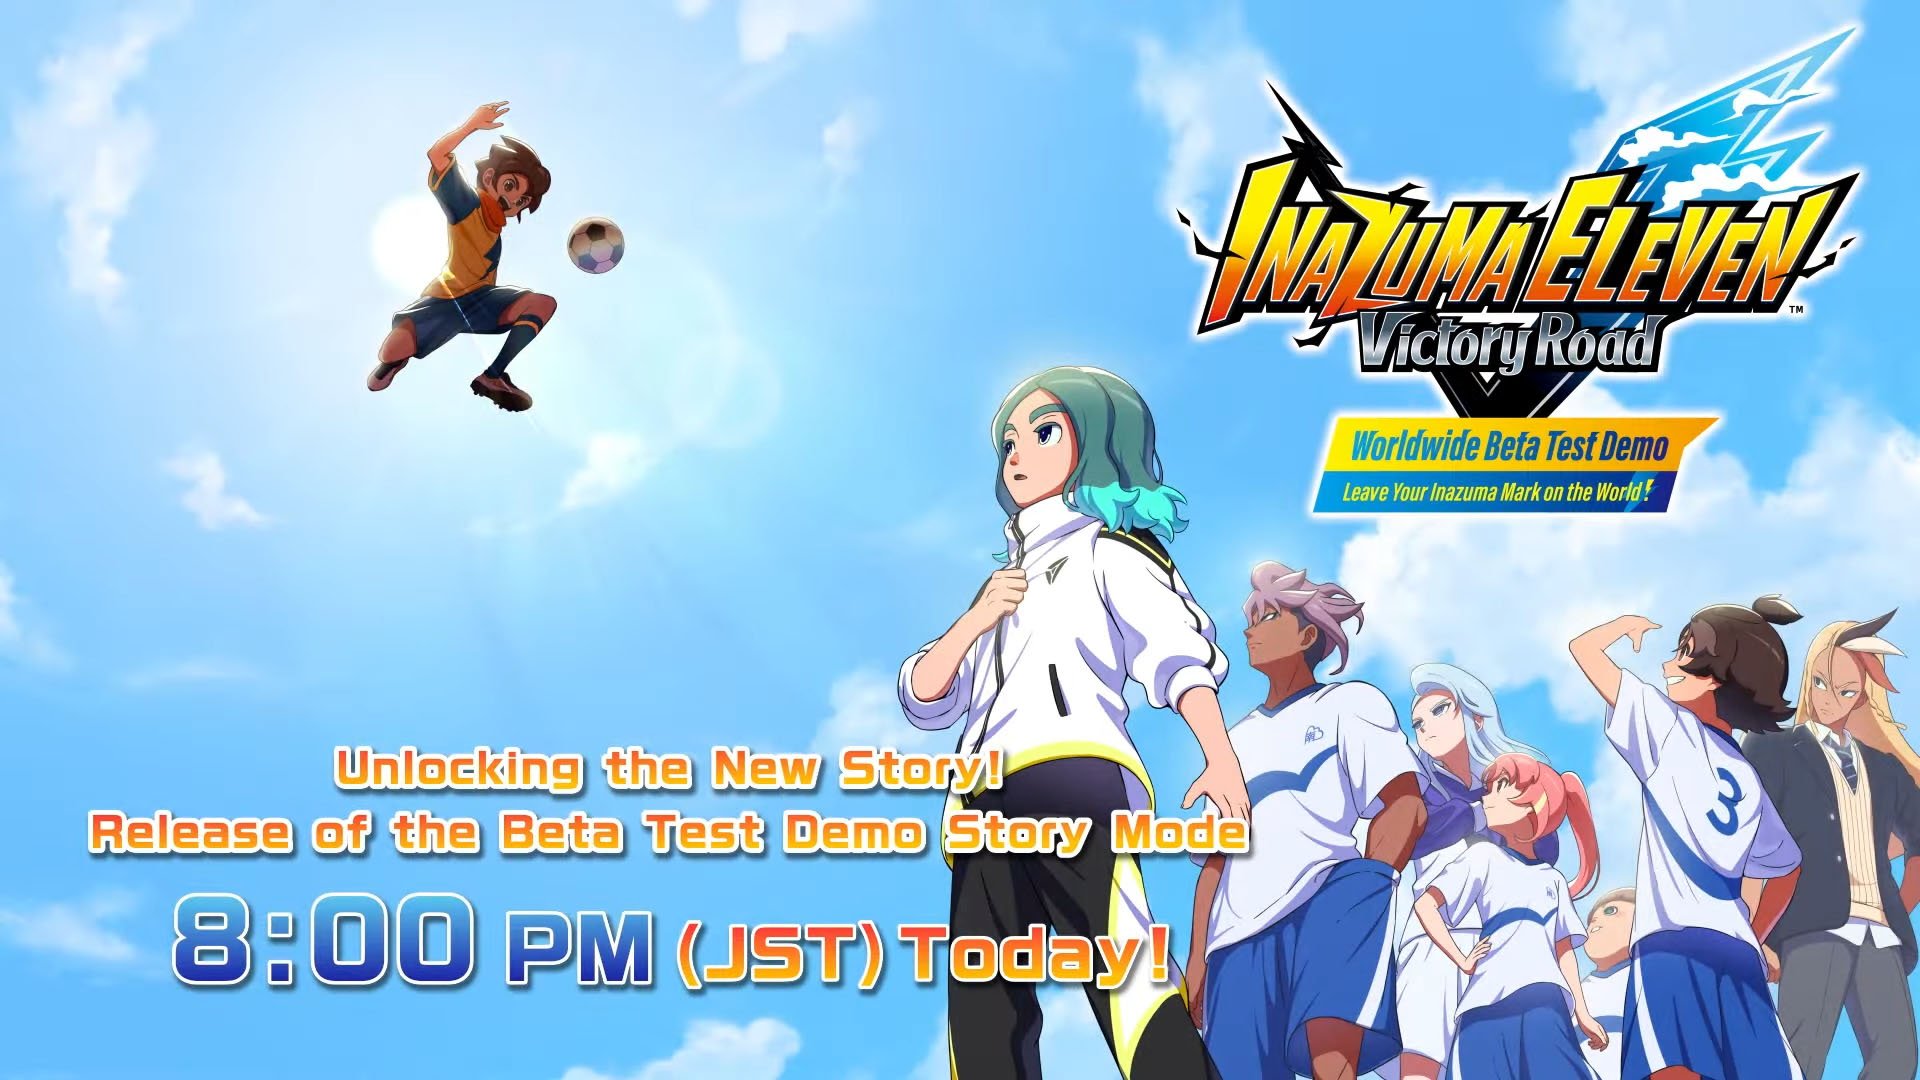 #
      Inazuma Eleven: Victory Road Worldwide Beta Test Demo ‘Story Mode’ update launches today